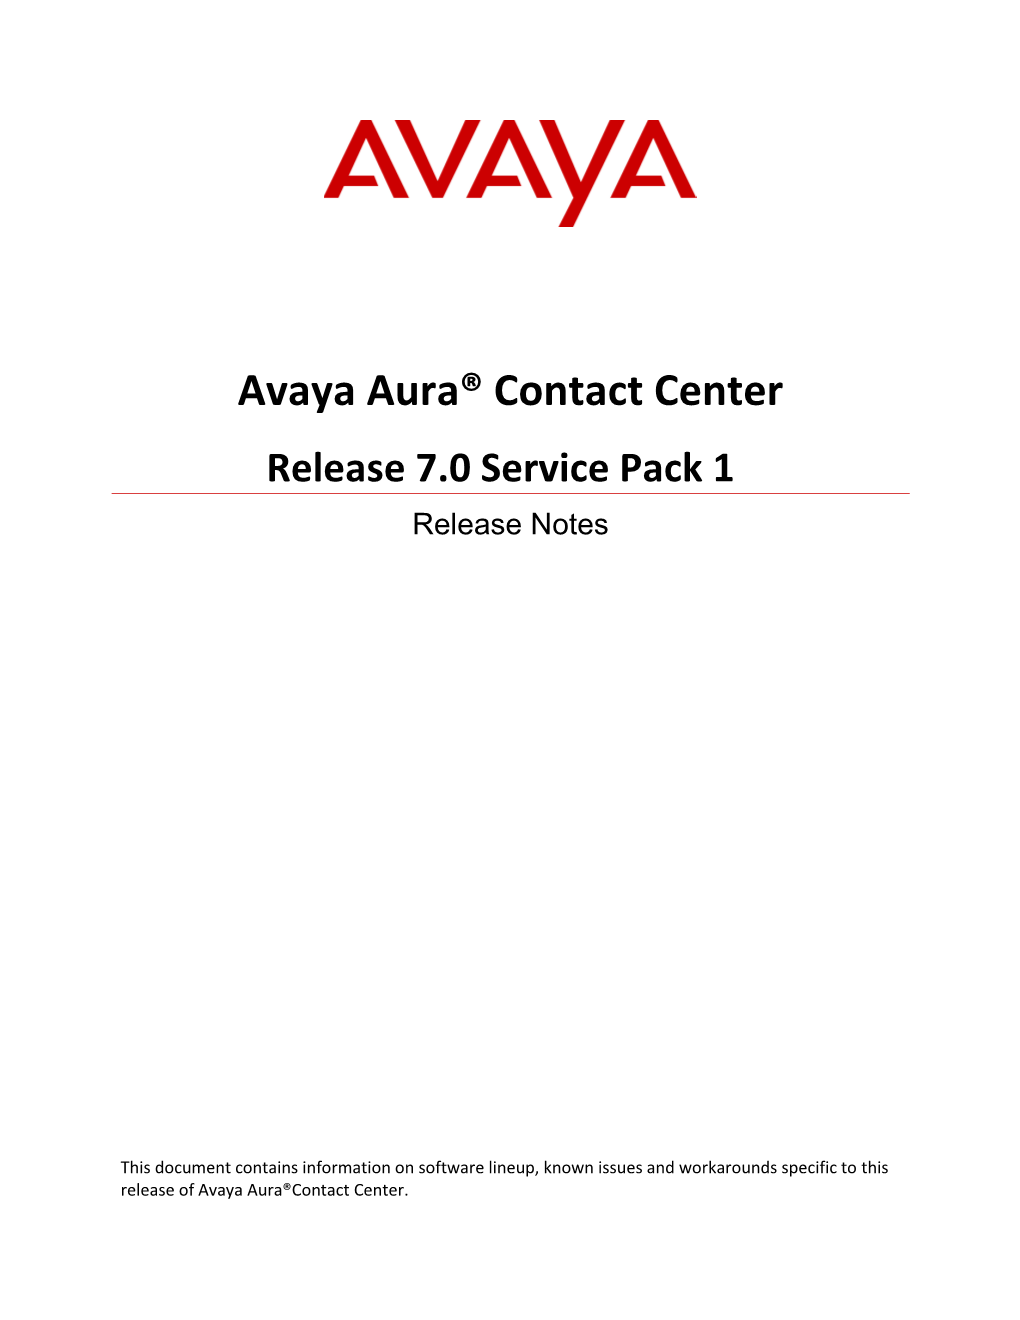 Avaya Aura Contact Center 7.0 Service Pack 1- Release Notes